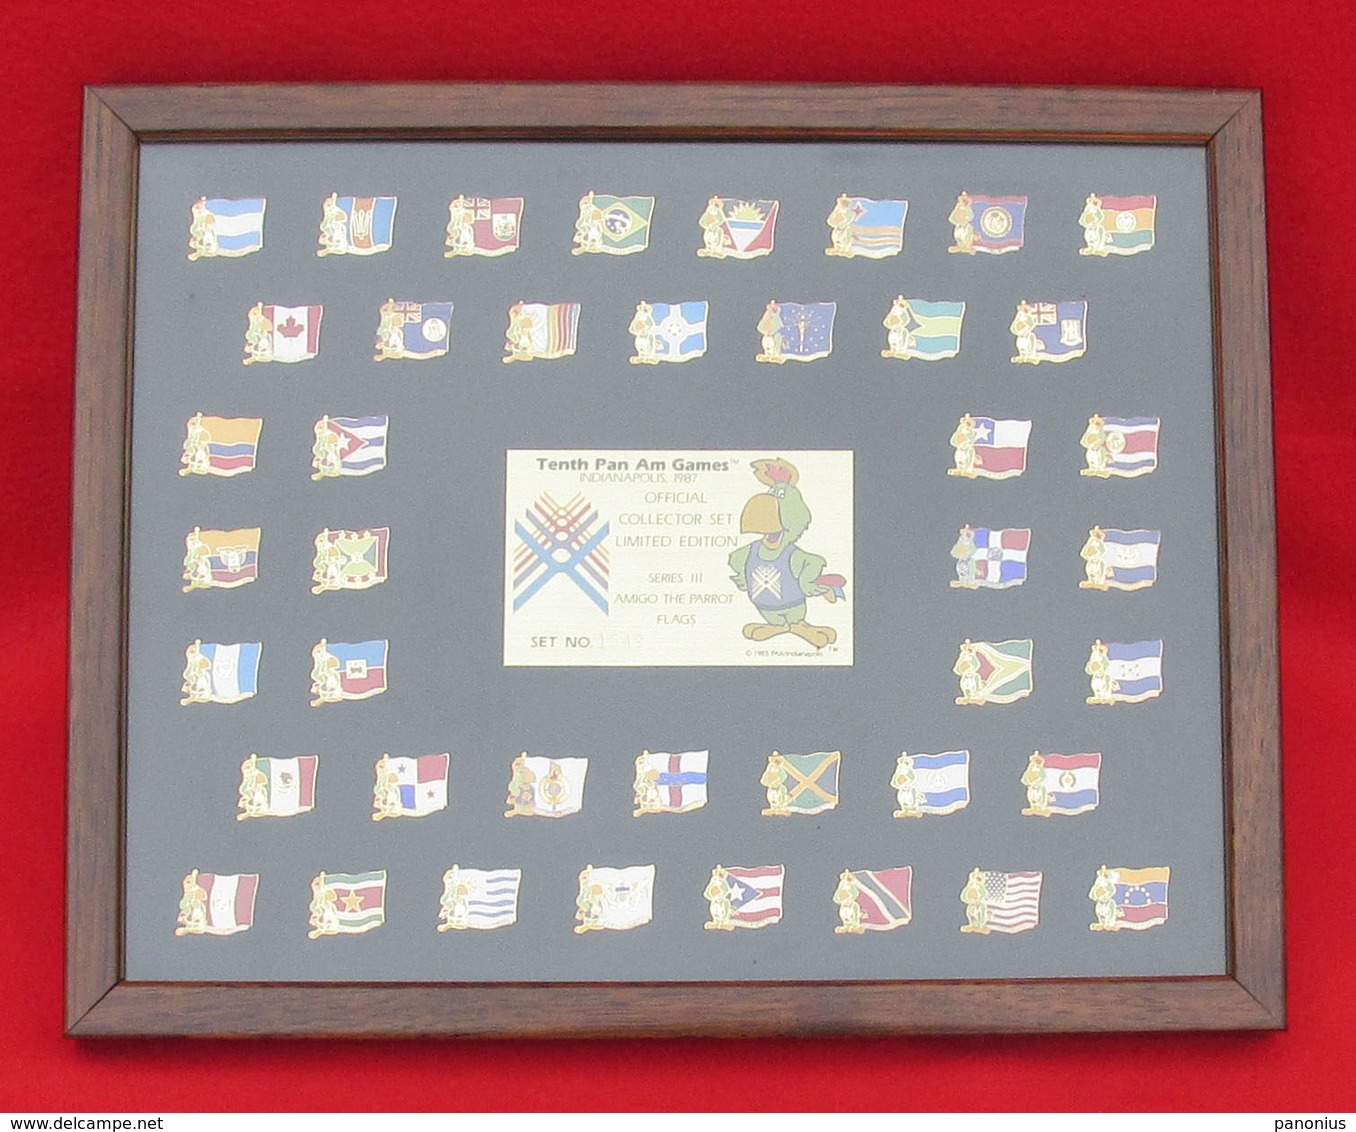 VINTAGE TENTH PAN AM GAMES INDIANAPOLIS UNITED STATES 1987 COLLECTOR SET FRAMED PINS BADGES!!! - Apparel, Souvenirs & Other